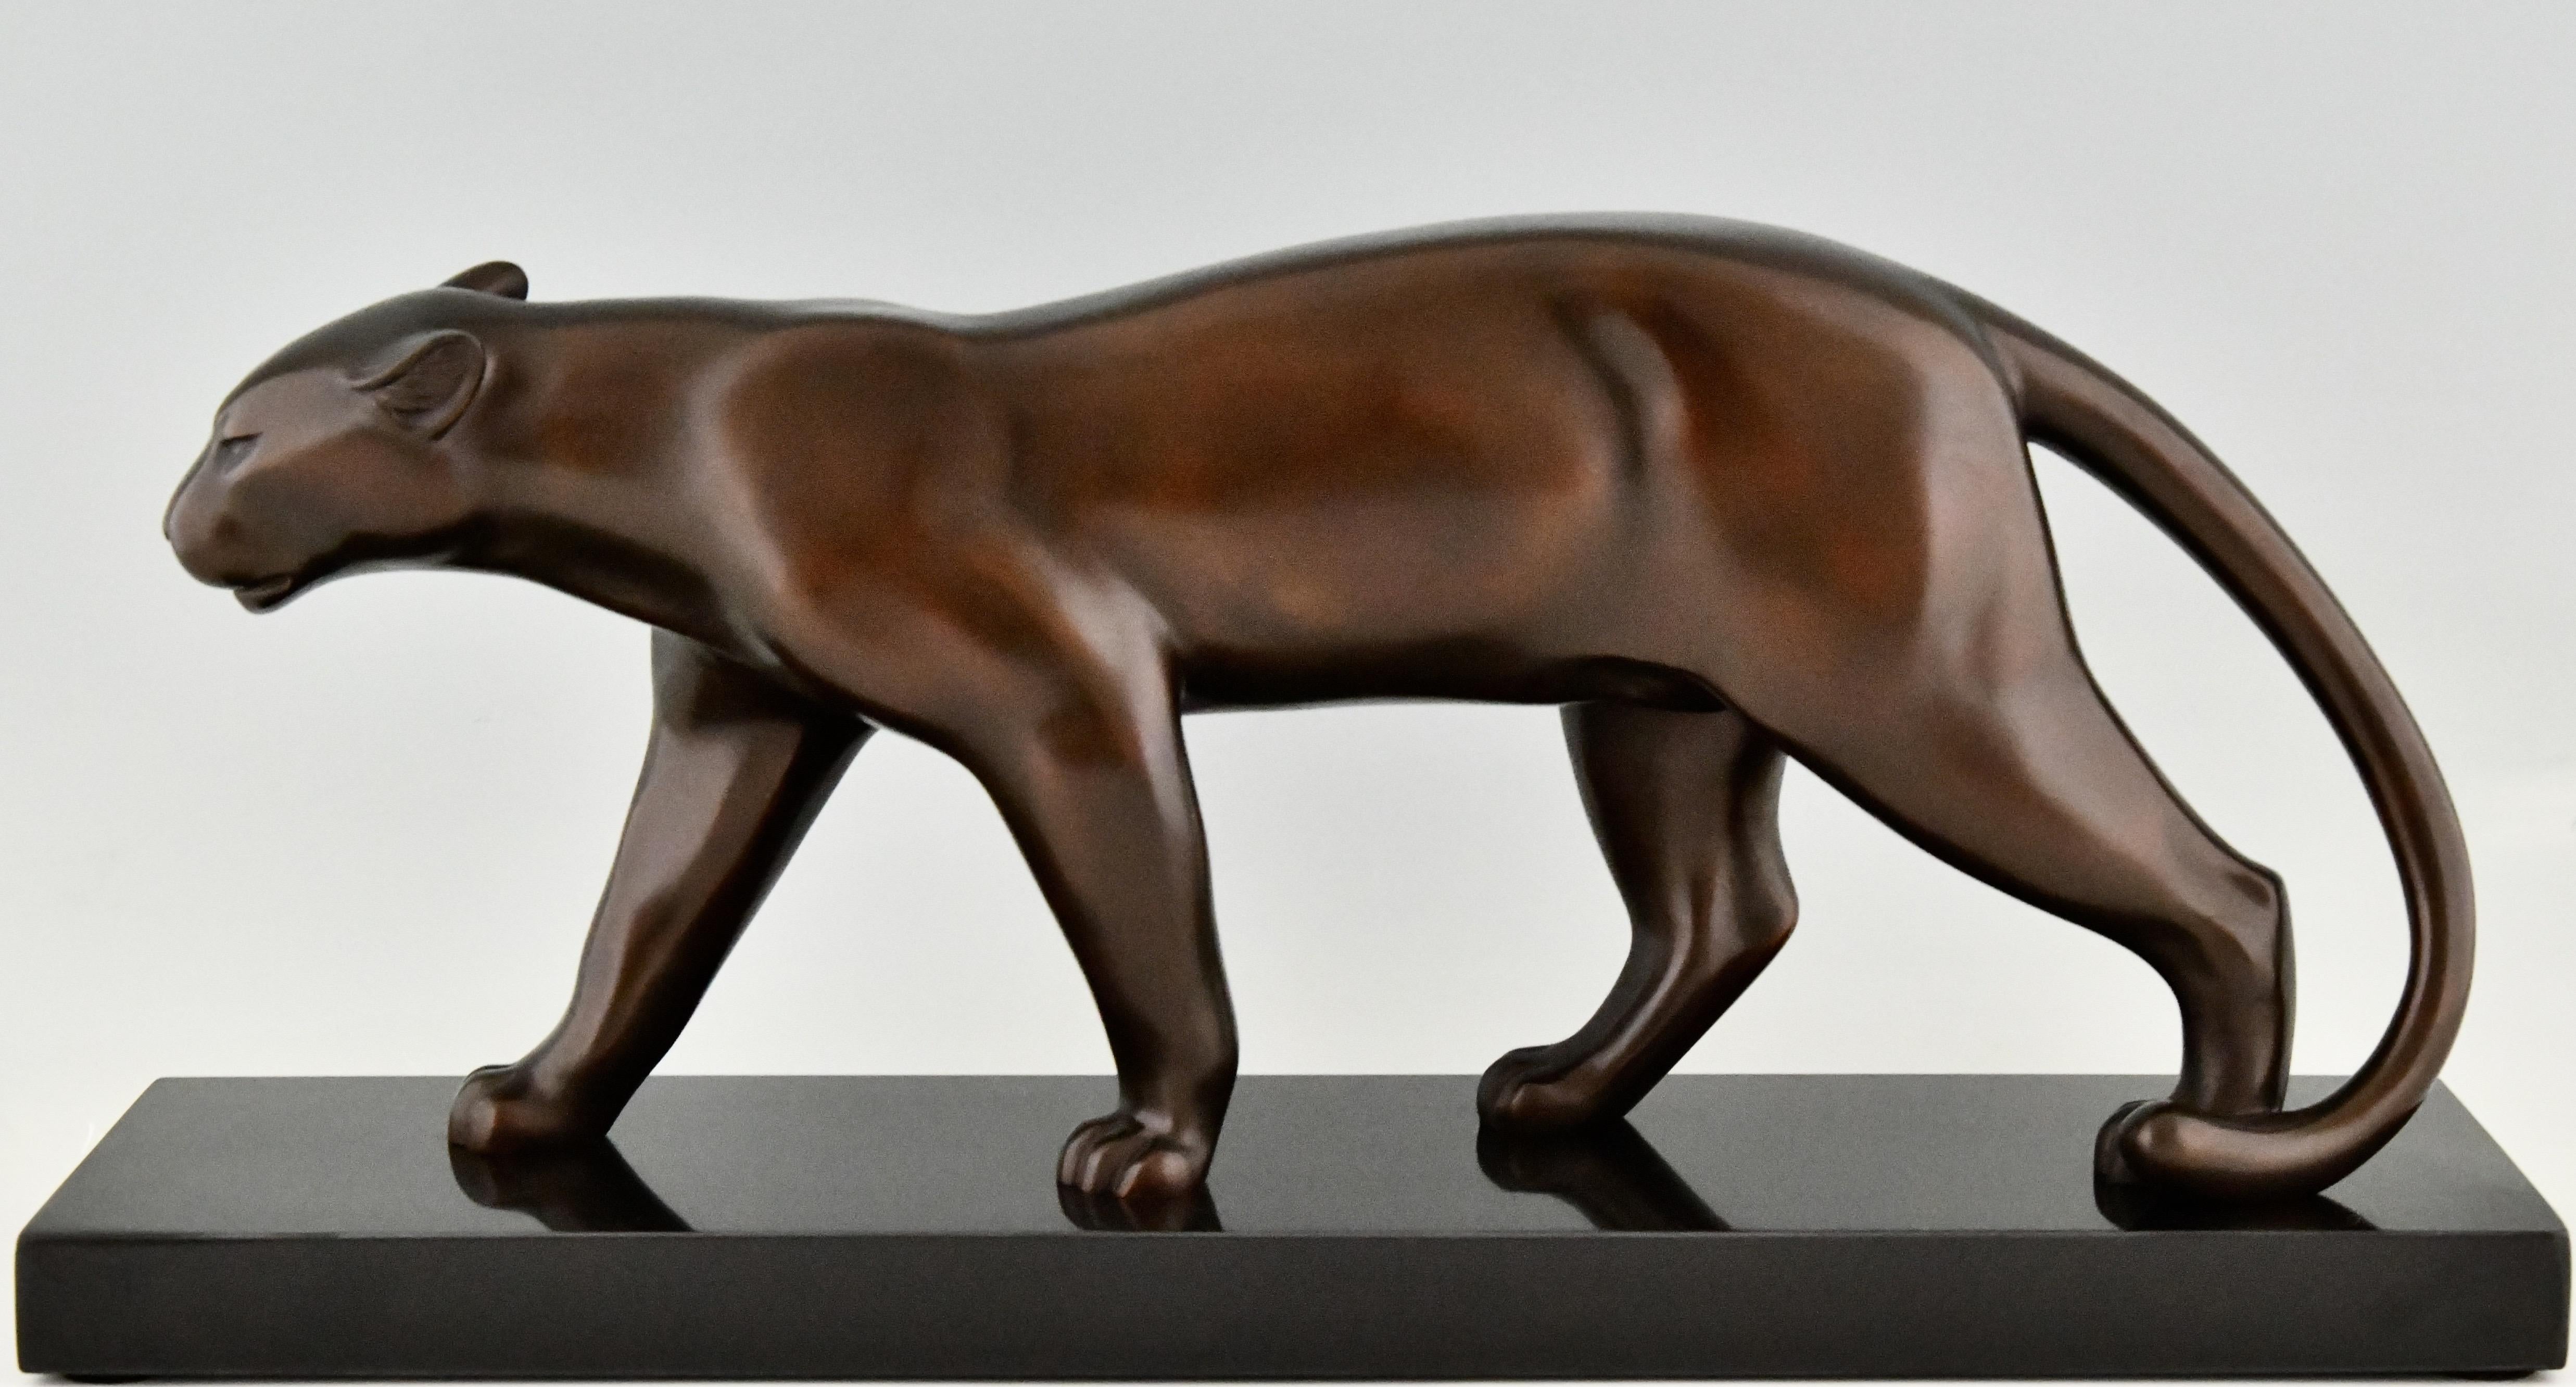 Stylish Art Deco bronze sculpture of walking panther by Emile Louis Bracquemond, bronze with brown patina, on a Belgian black marble base. France 1930. 
This panther is mentioned in the book 
Dictionnaire illustré des sculpteurs animaliers &